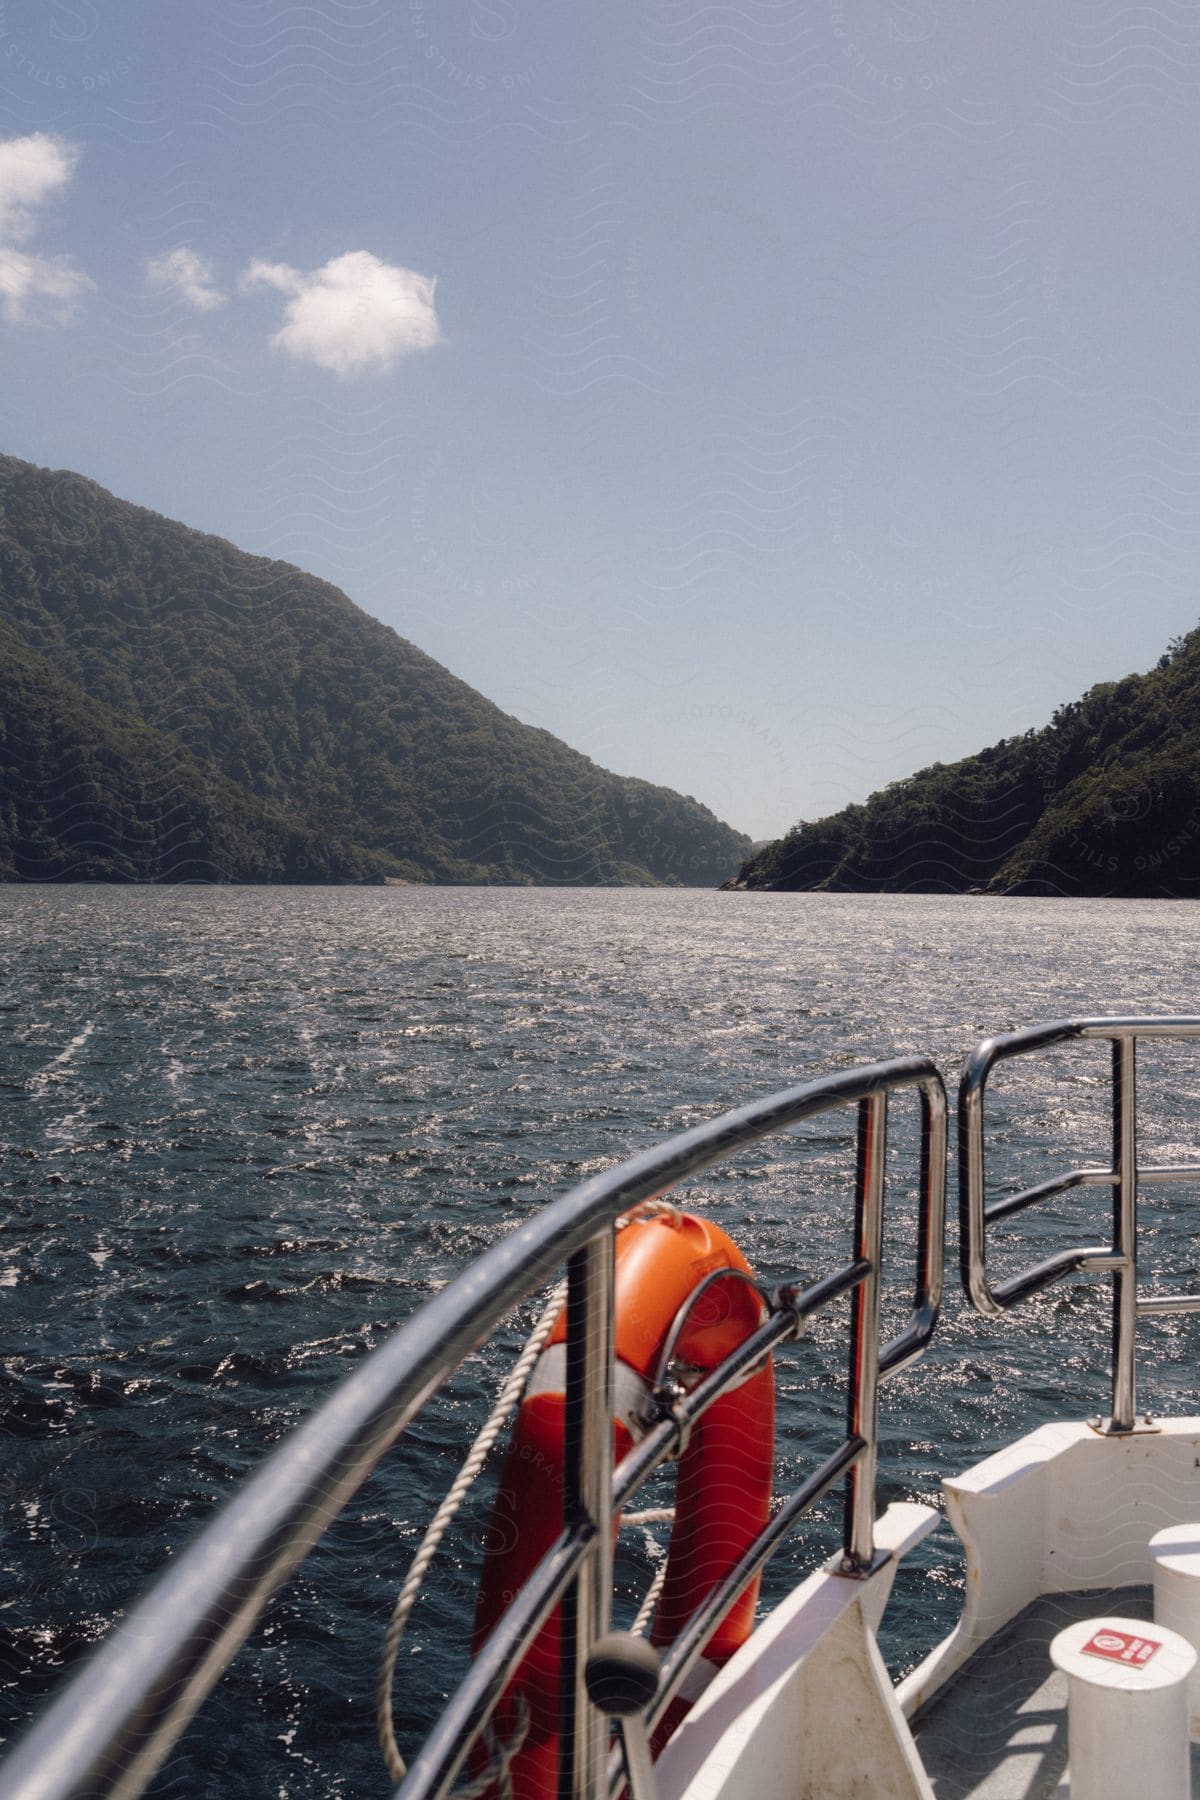 Green mountains on horizon, body of water below as seen from boat railing during the day